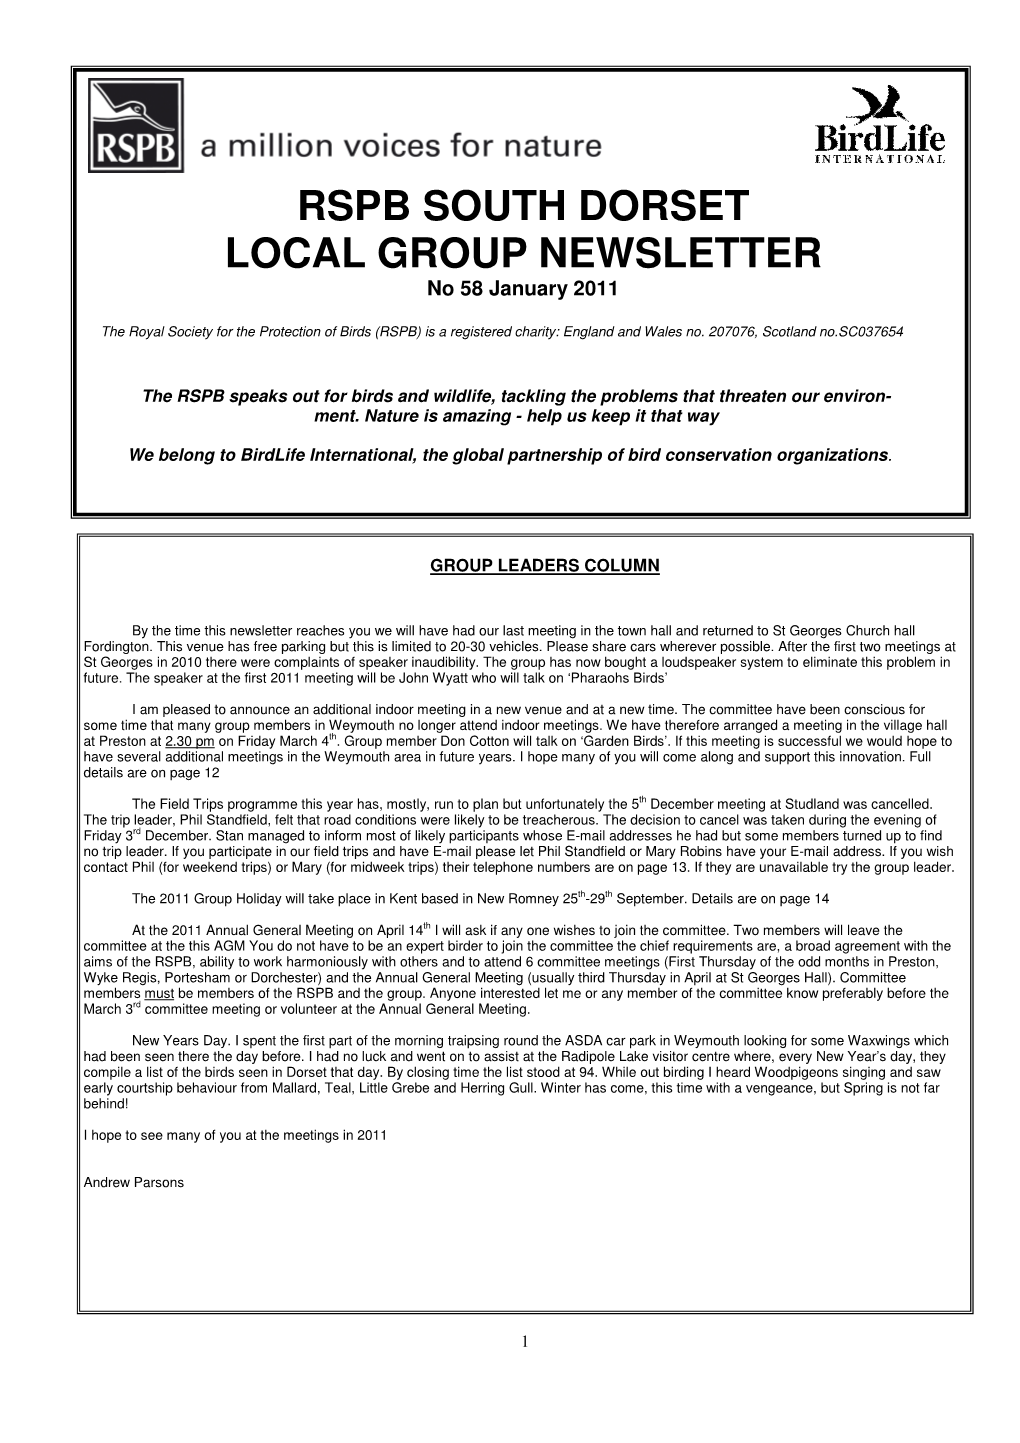 RSPB SOUTH DORSET LOCAL GROUP NEWSLETTER No 58 January 2011